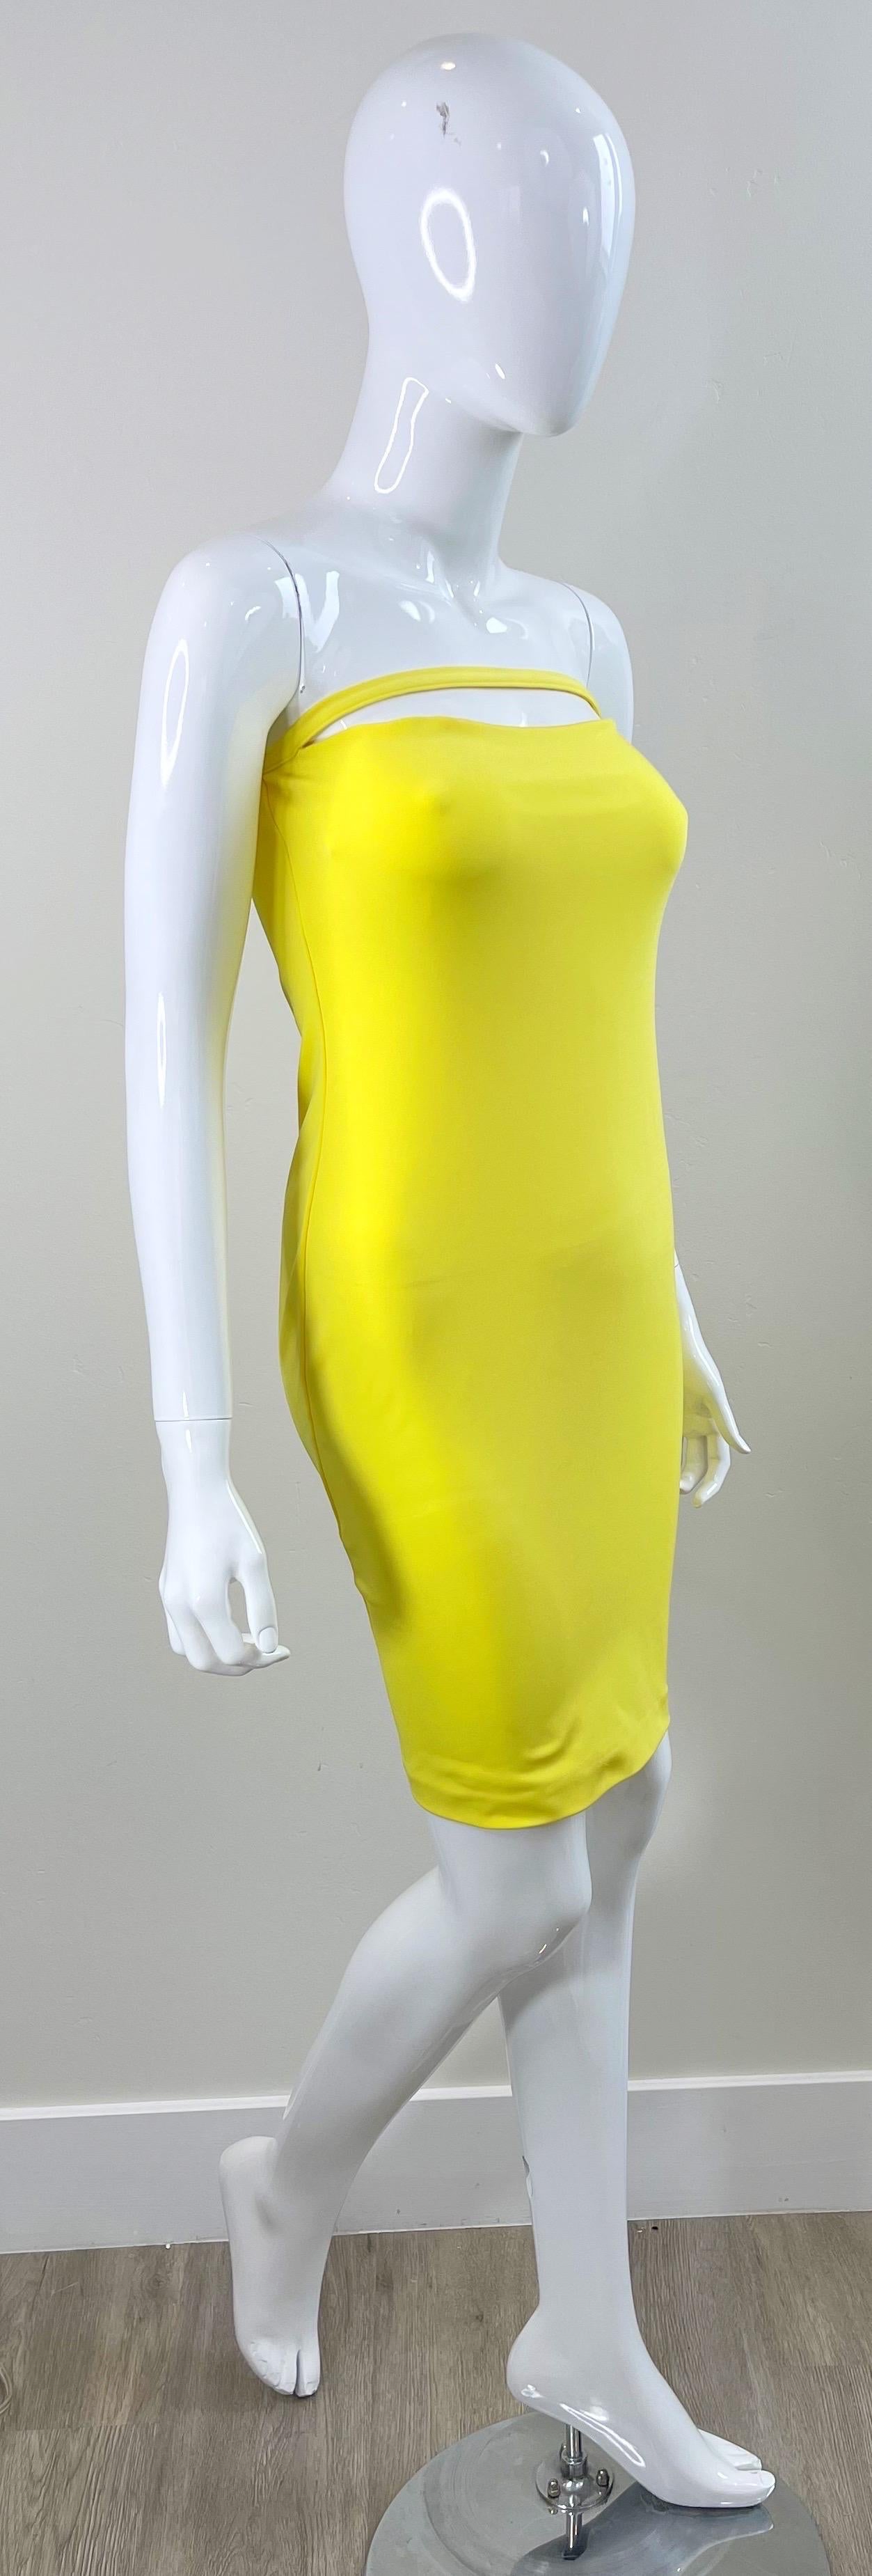 Women's 1990s Gianni Versace Versus Size 8 Canary Yellow Strapless Vintage 90s Dress For Sale